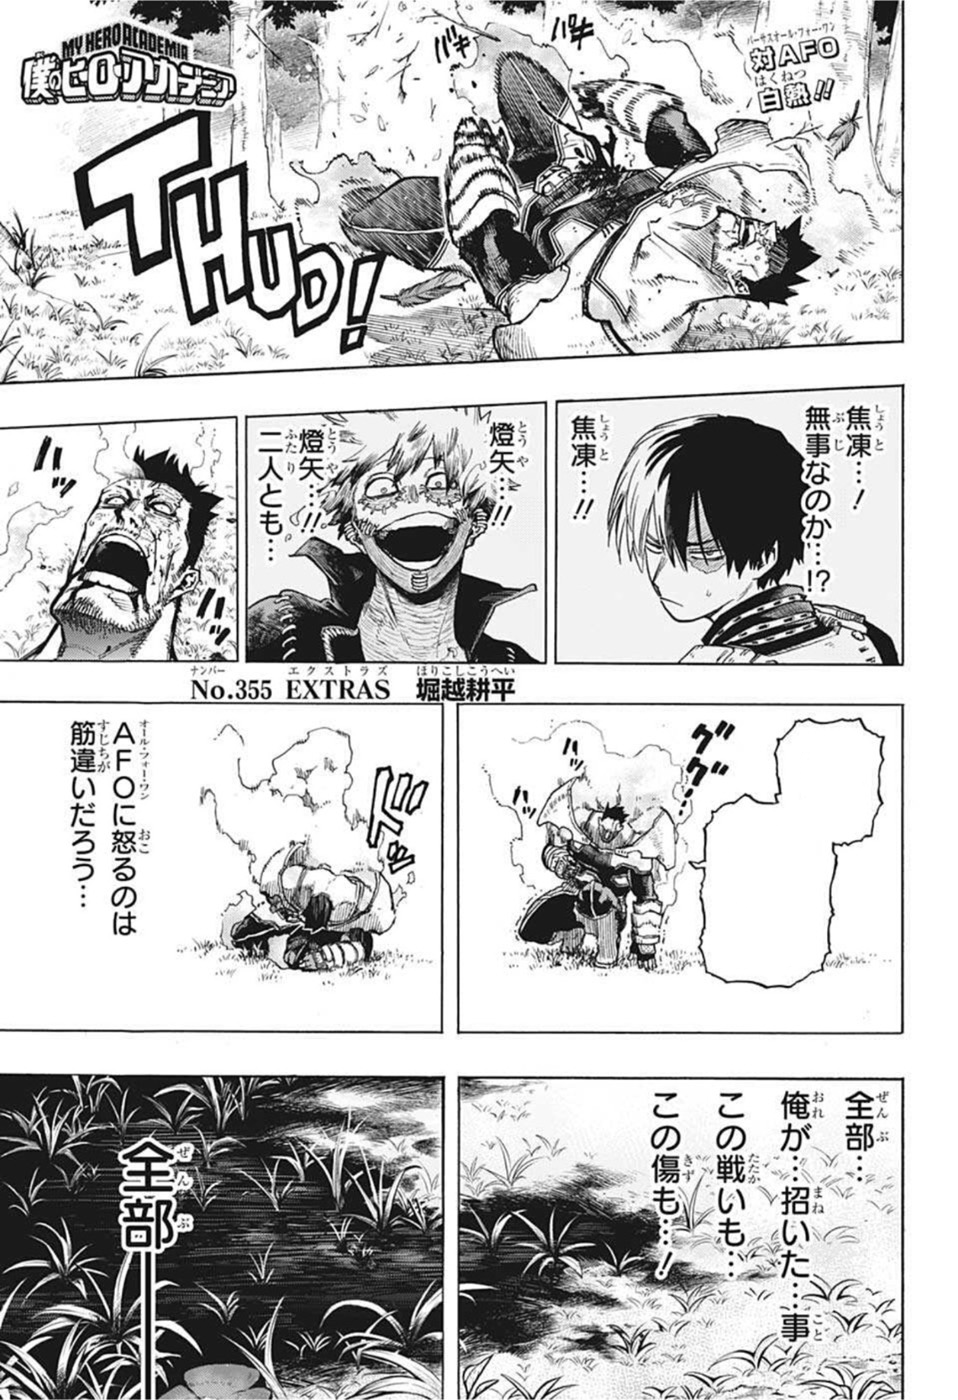 AFO's Life] My Hero Academia Chapter 408 Raw Scans, Spoilers